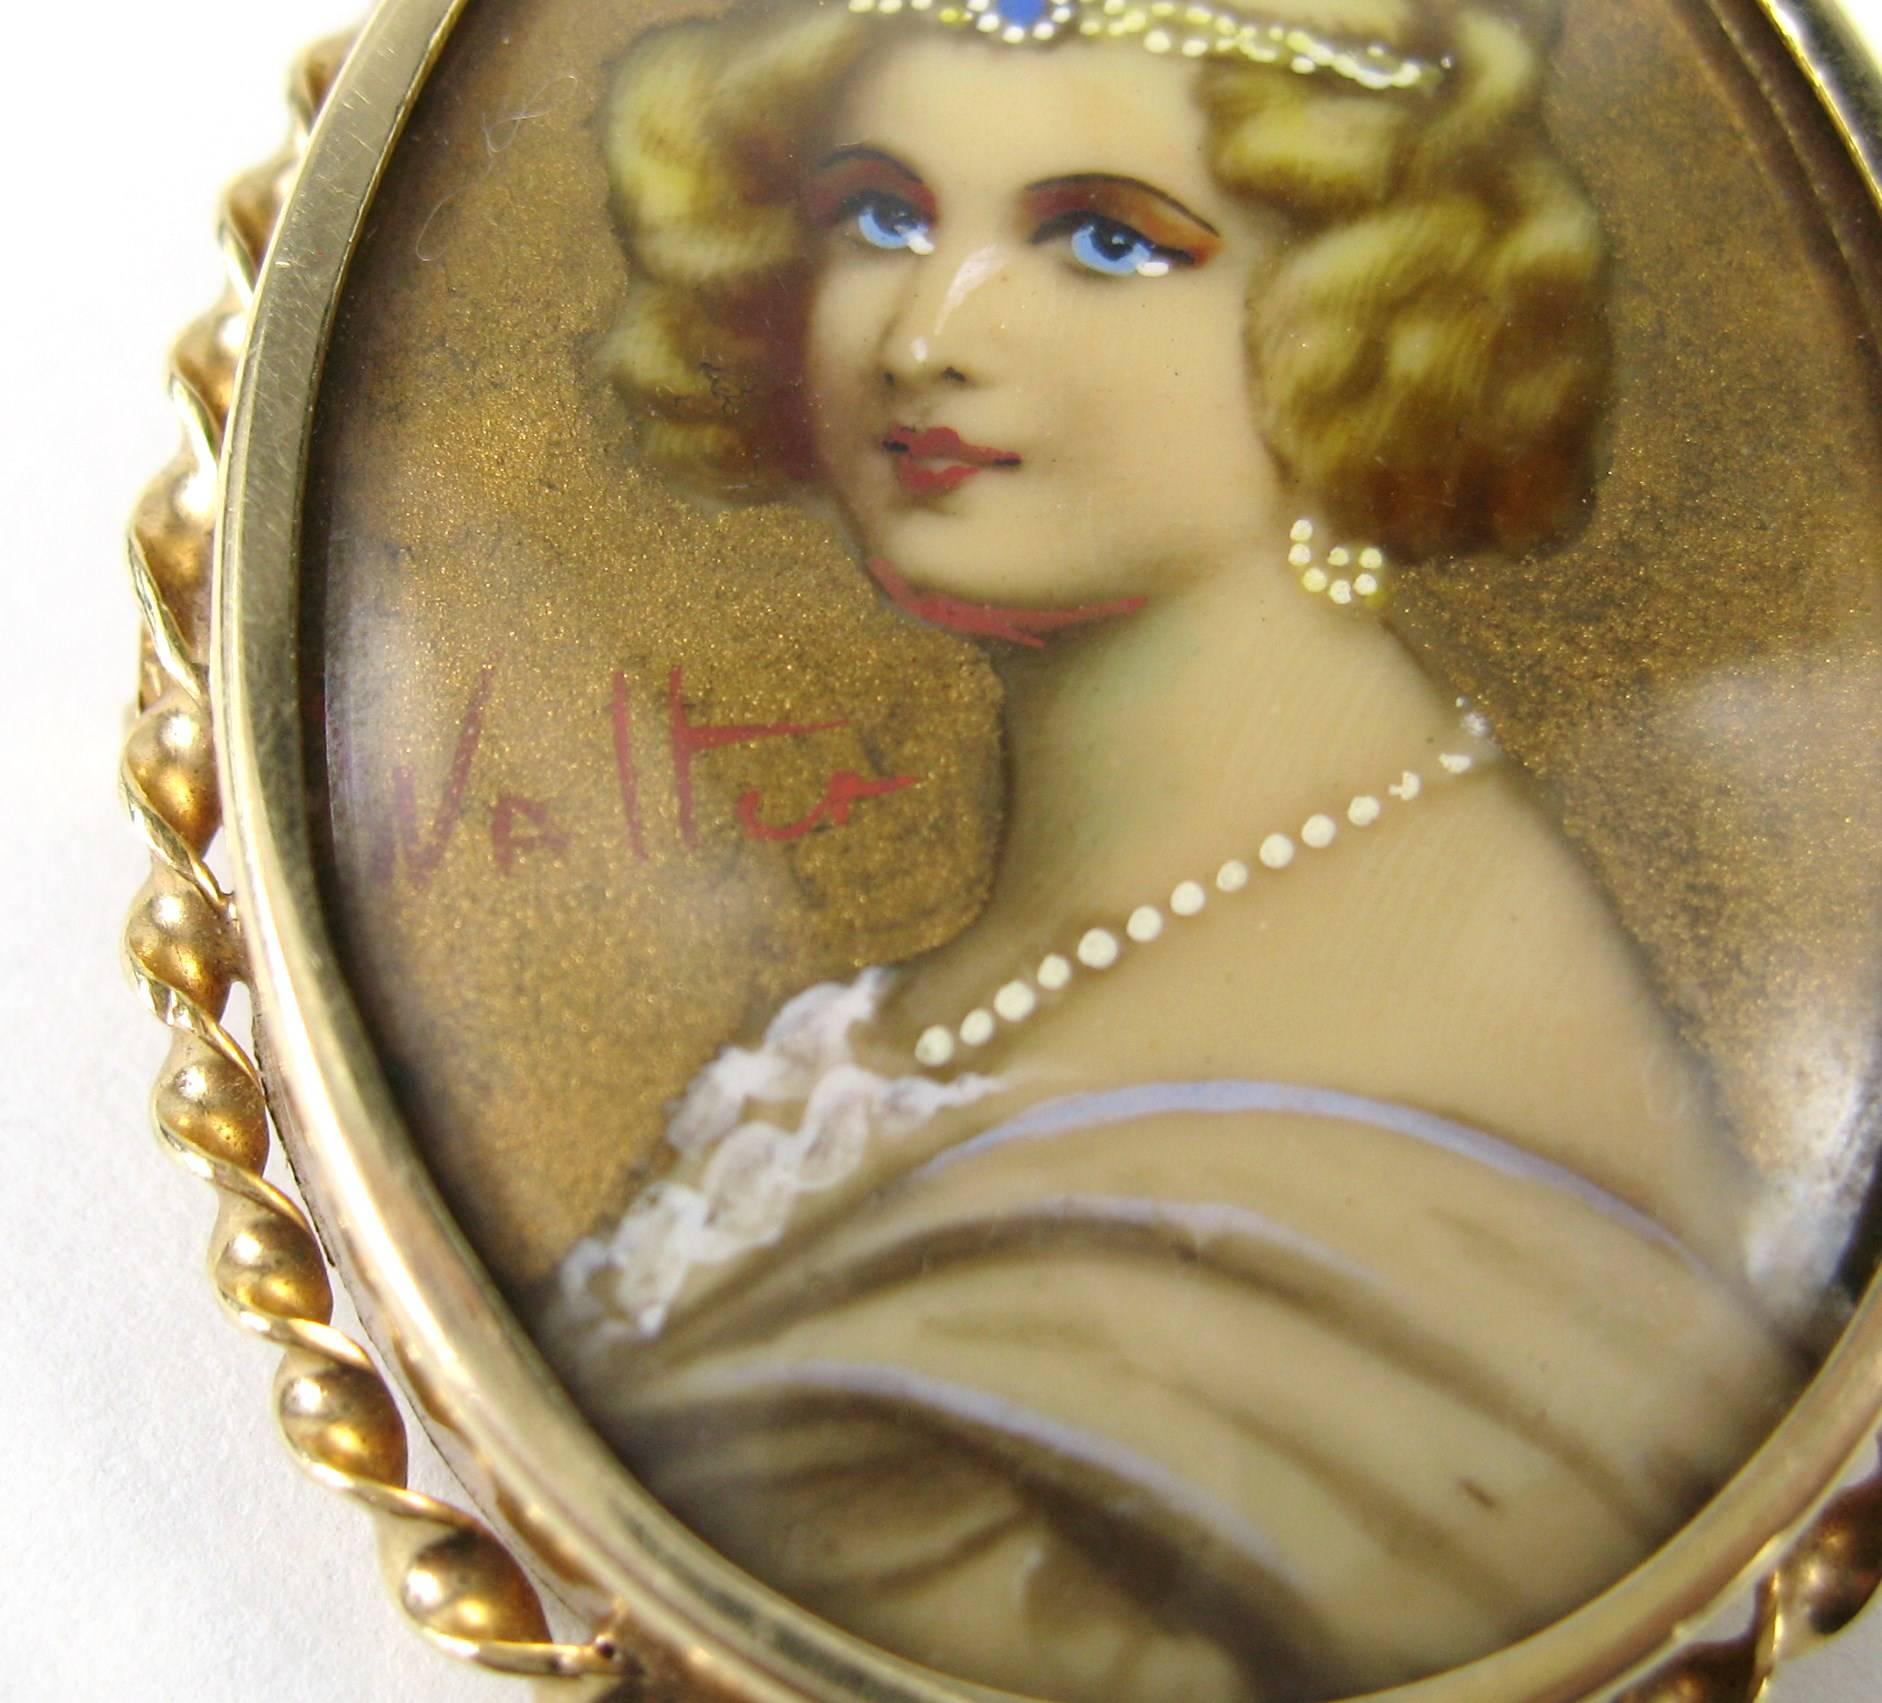 14k yellow gold antique hand painted on porcelain portrait brooch pin with a bale on the back.  The portrait is under glass depicting a stylishly dressed woman. Signed Measuring 1.75 inches or 44.49mm x 1.35 inches or 34.4 mm. This is out of a